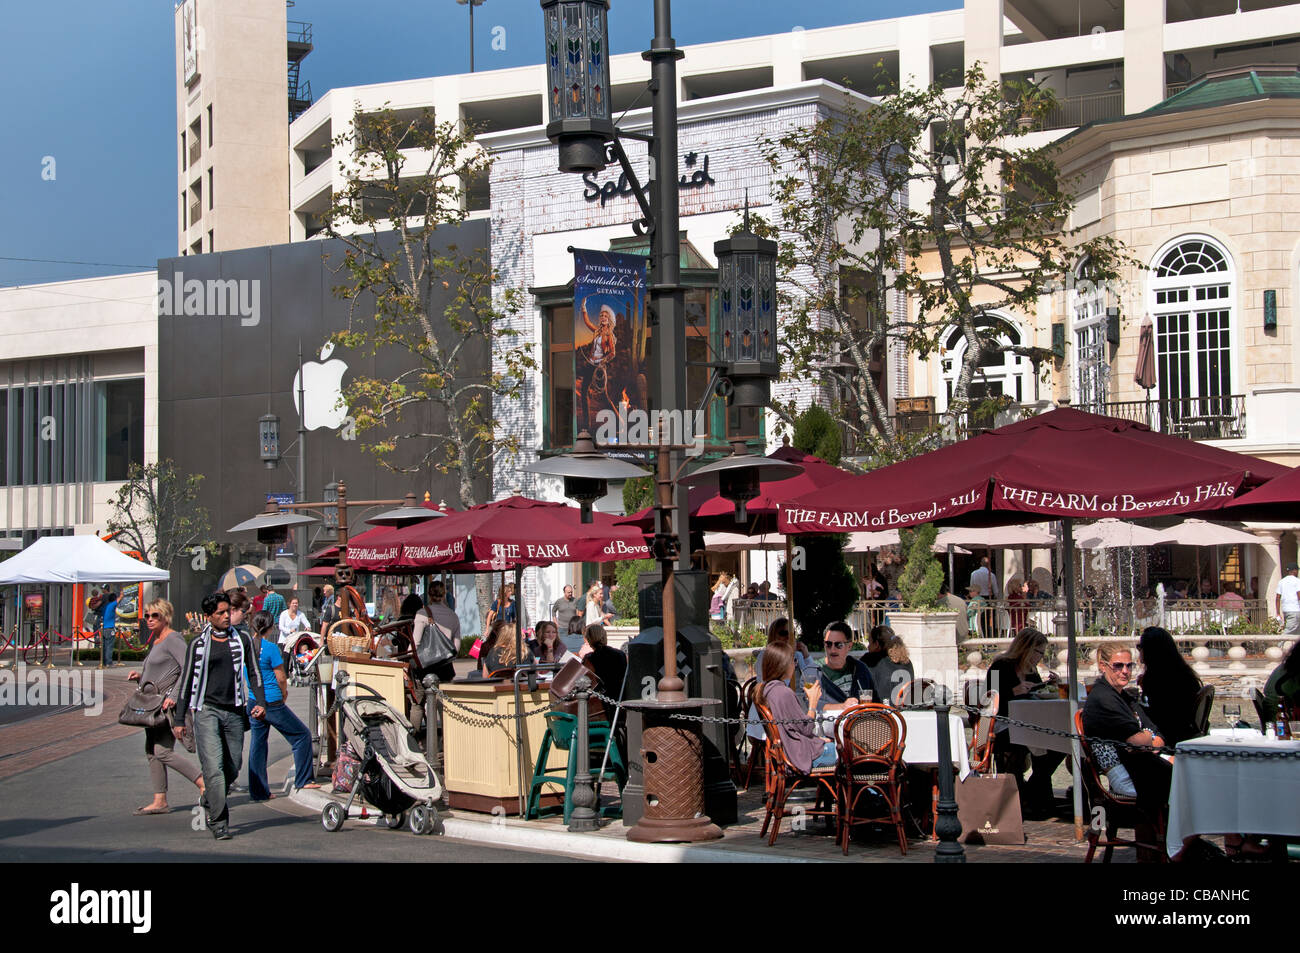 Le Grove Farmers Market retail entertainment shopping mall Los Angeles California United States Banque D'Images